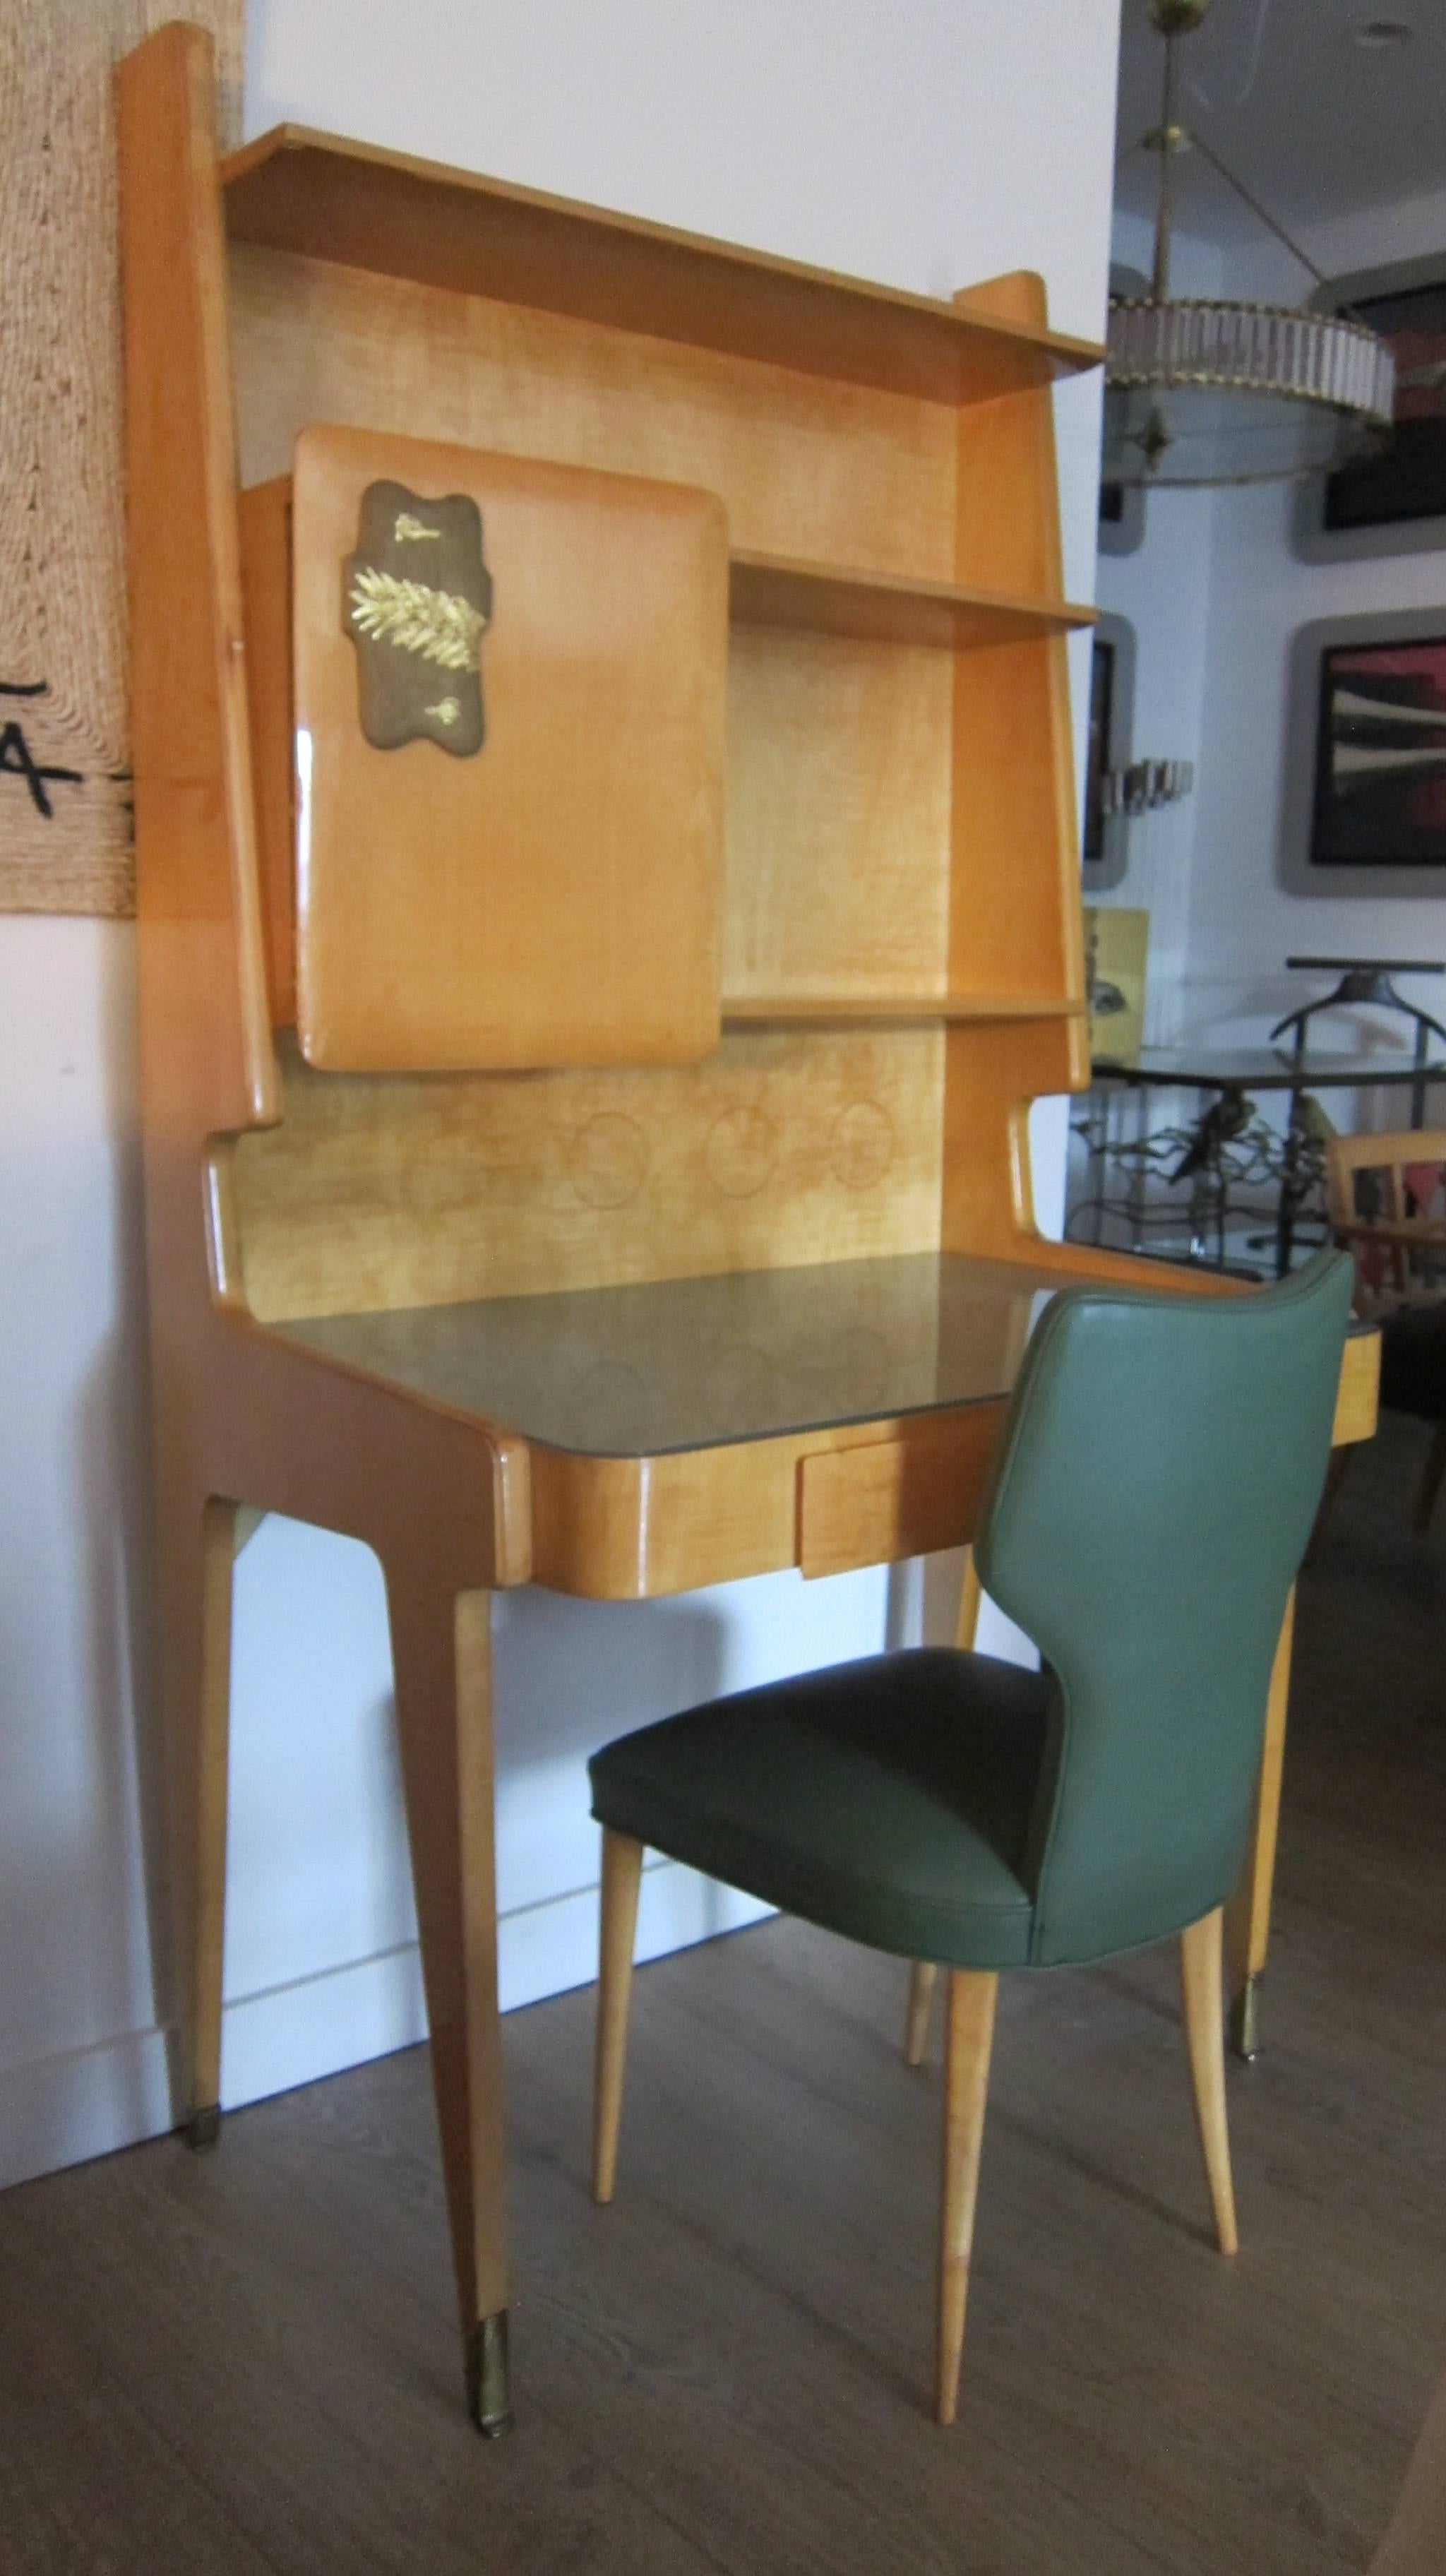 A rare Italian 1950s , writing desk or secretary in the style of Gio Ponti. All pear wood veneer with light green inset glass top, solid brass sabots, comes with the original matching chair (newly upholstered with green leather). Original patina.